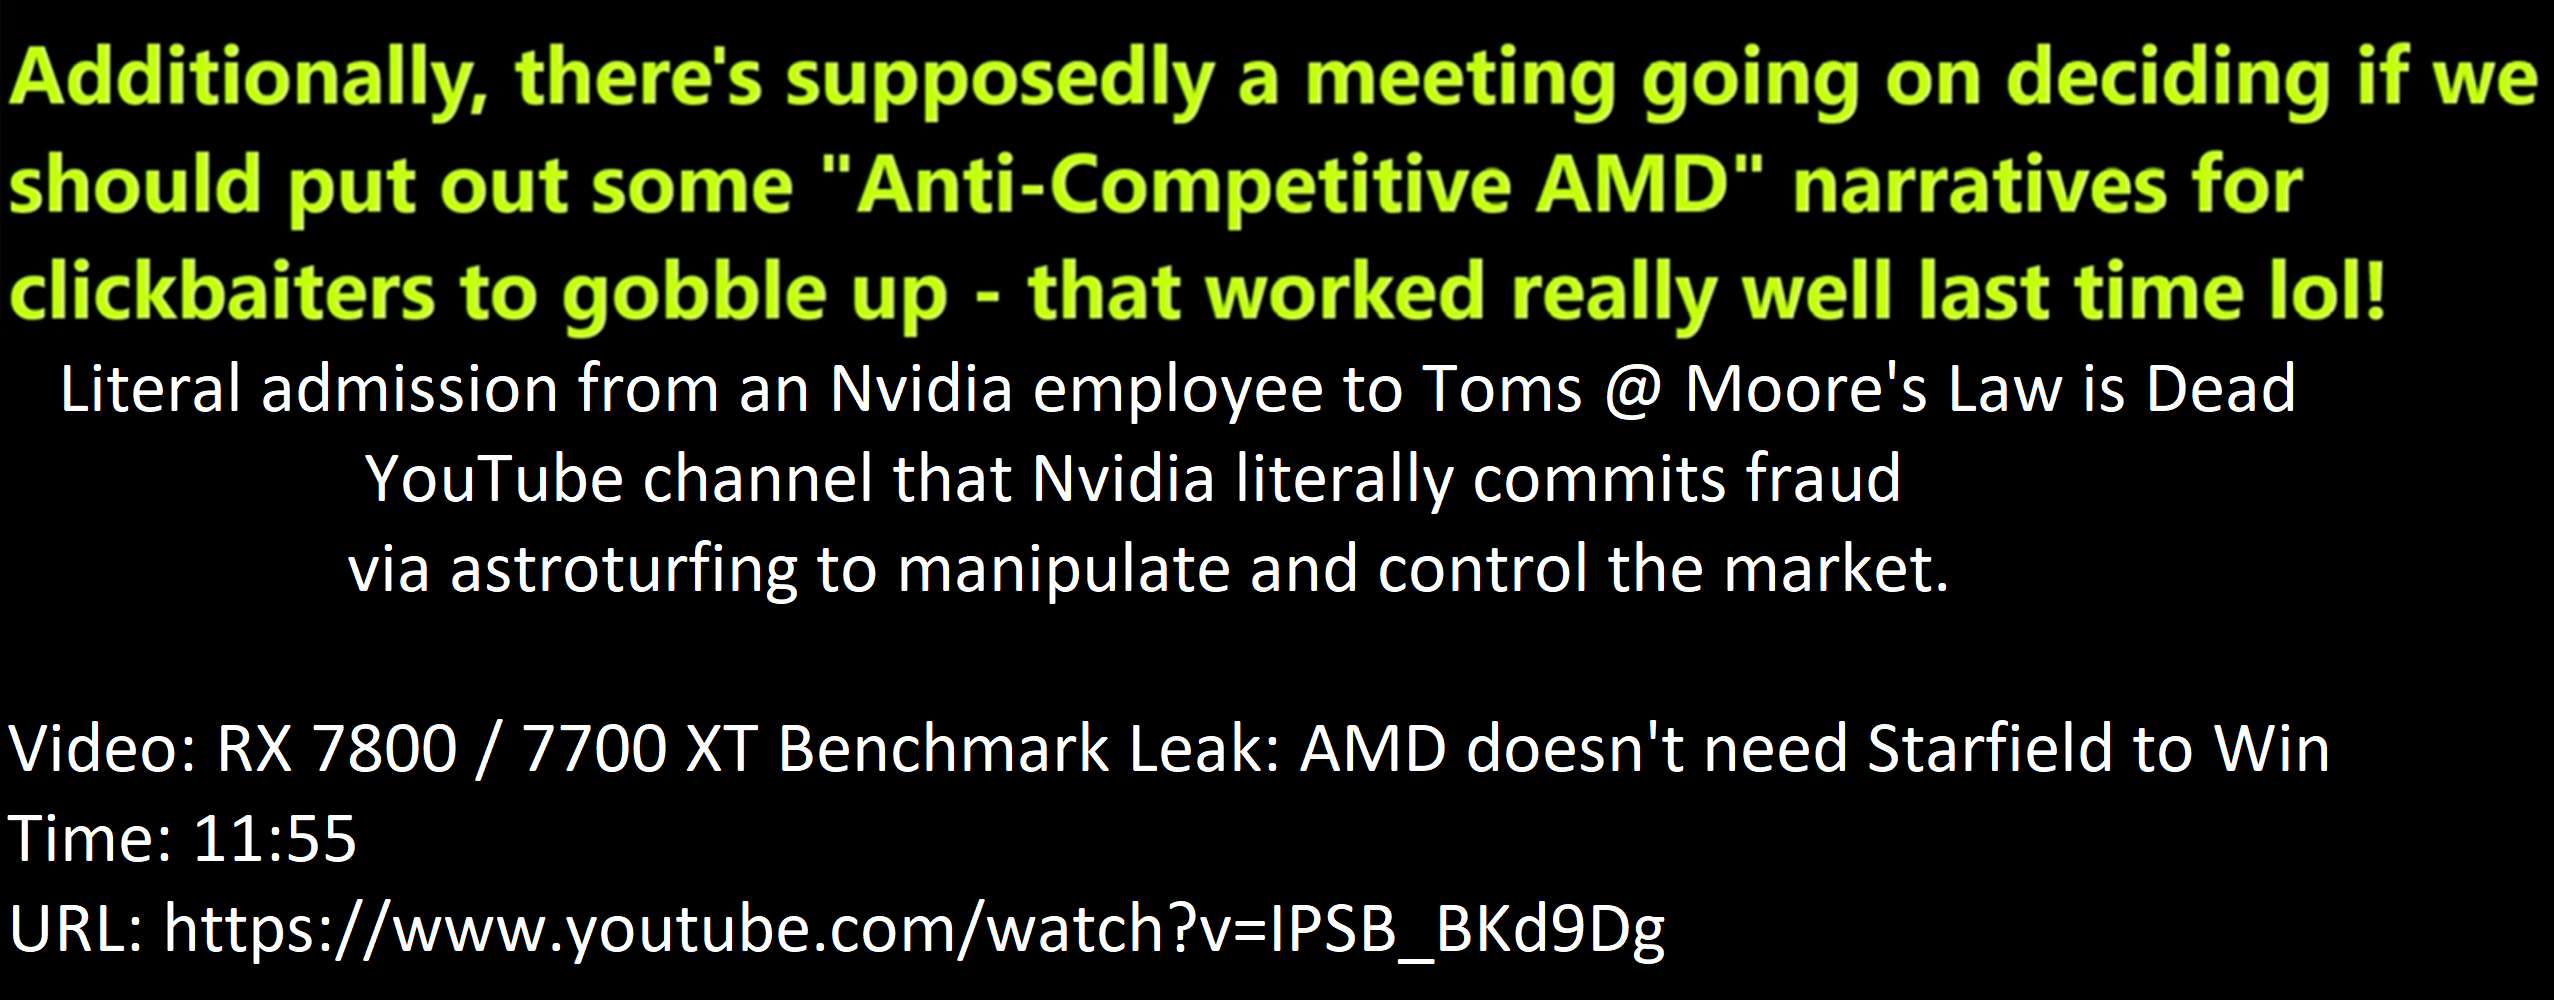 nvidia astroturfing - Copy.png